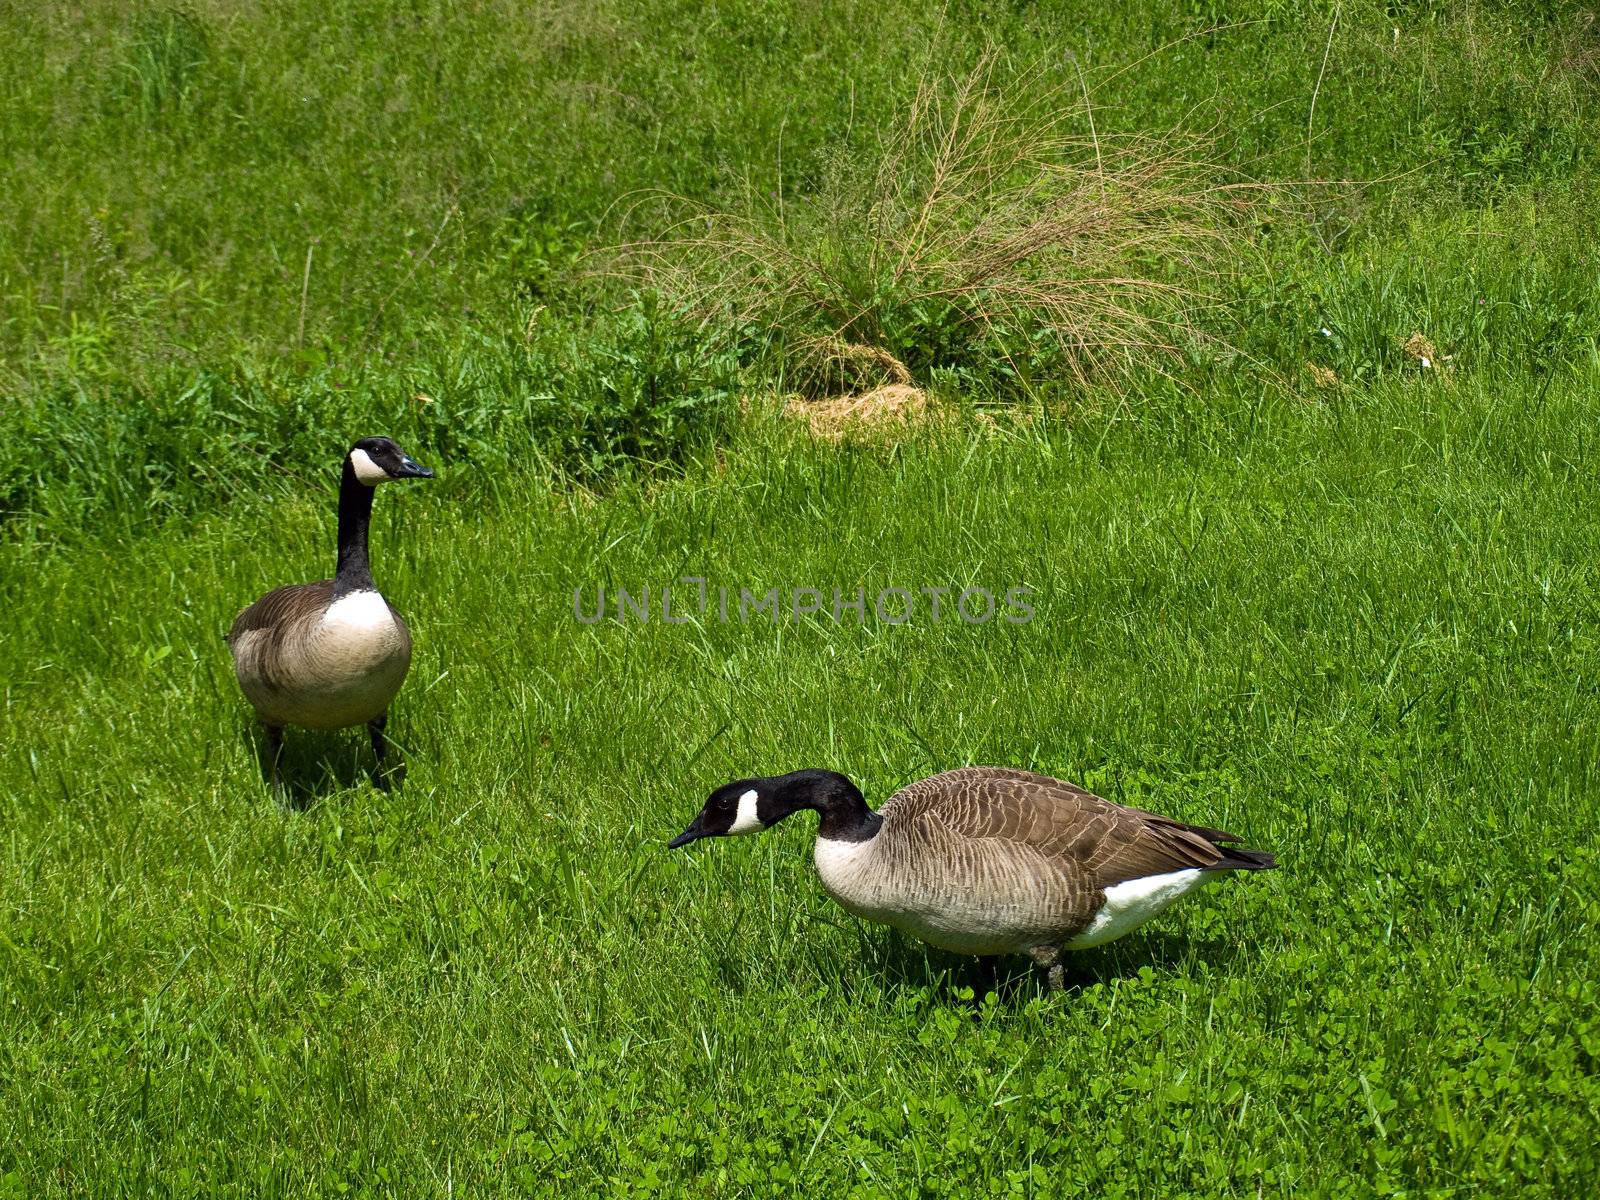 Two Canadian Geese in a Grassy Field